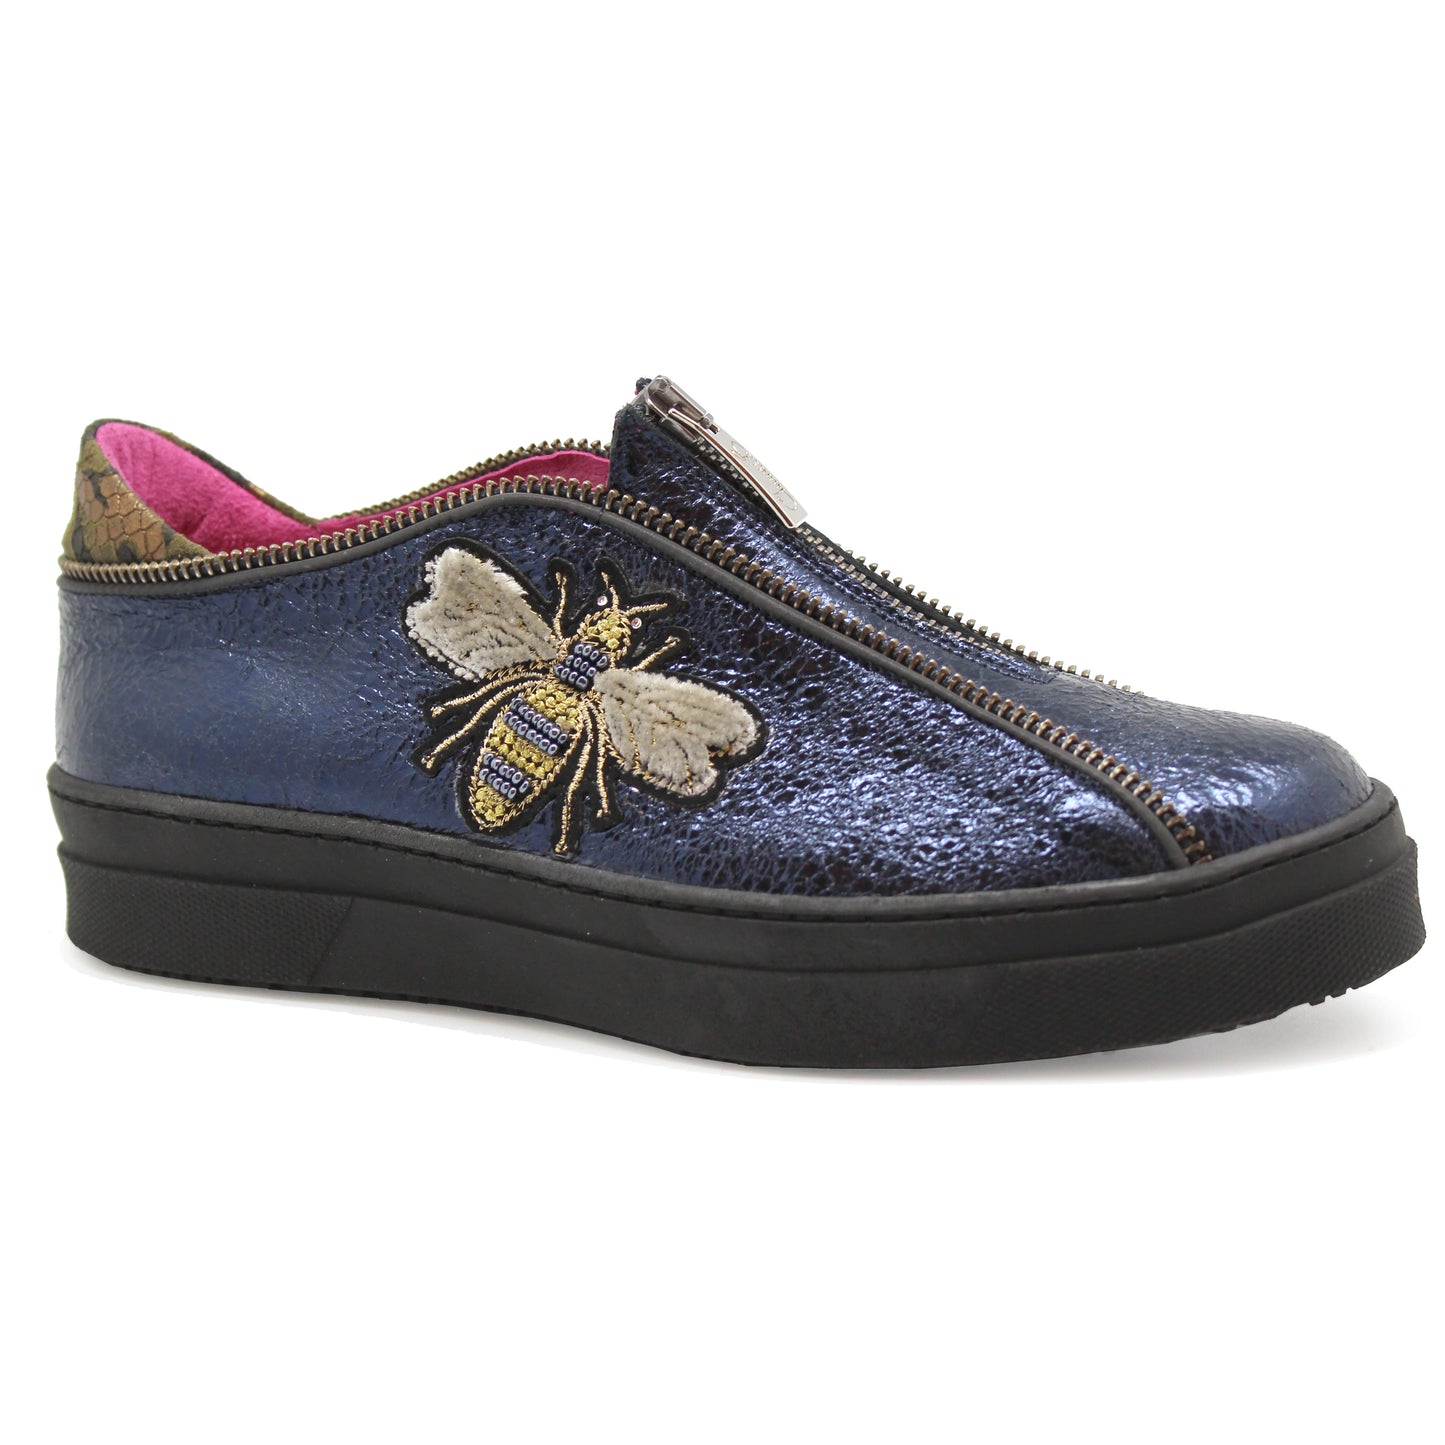 Royal Blue Bee Designer Shoes for Ladies in the UK